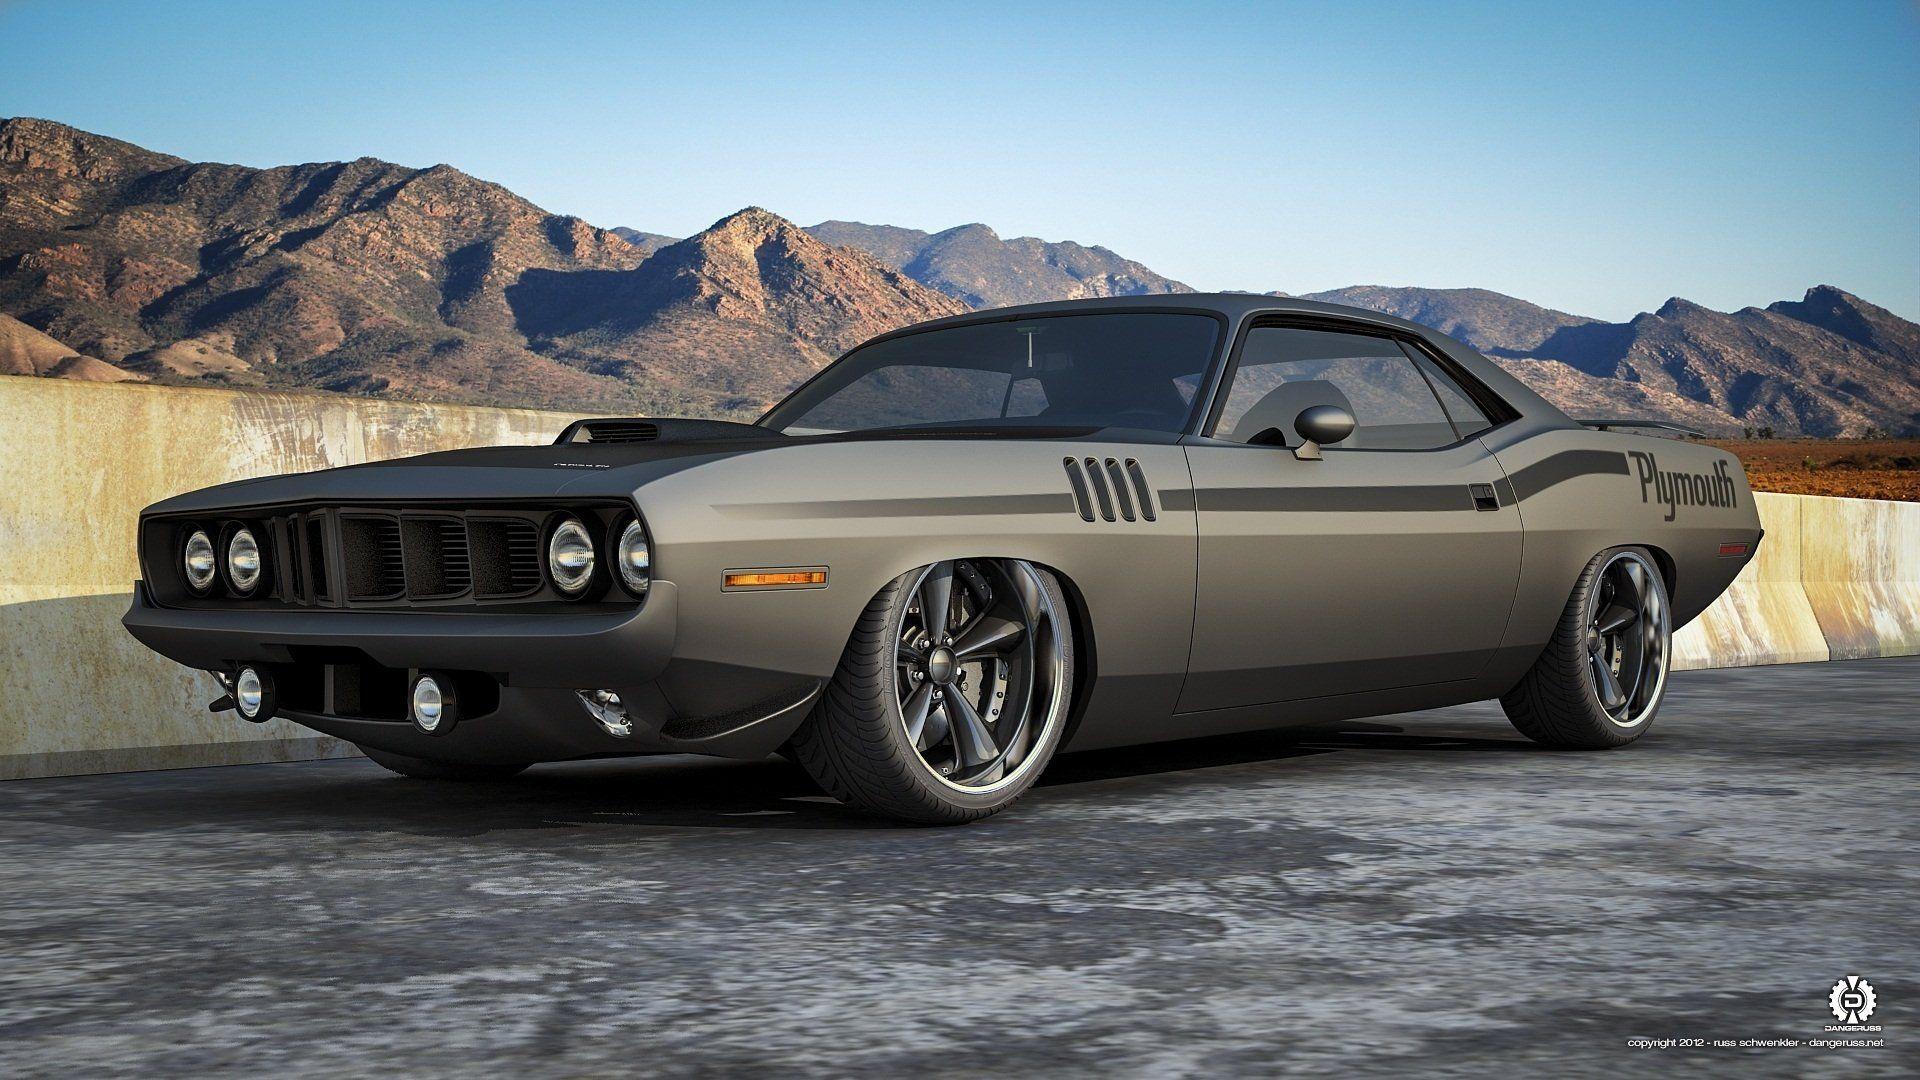 Plymouth Barracuda HD Wallpaper and Background Image